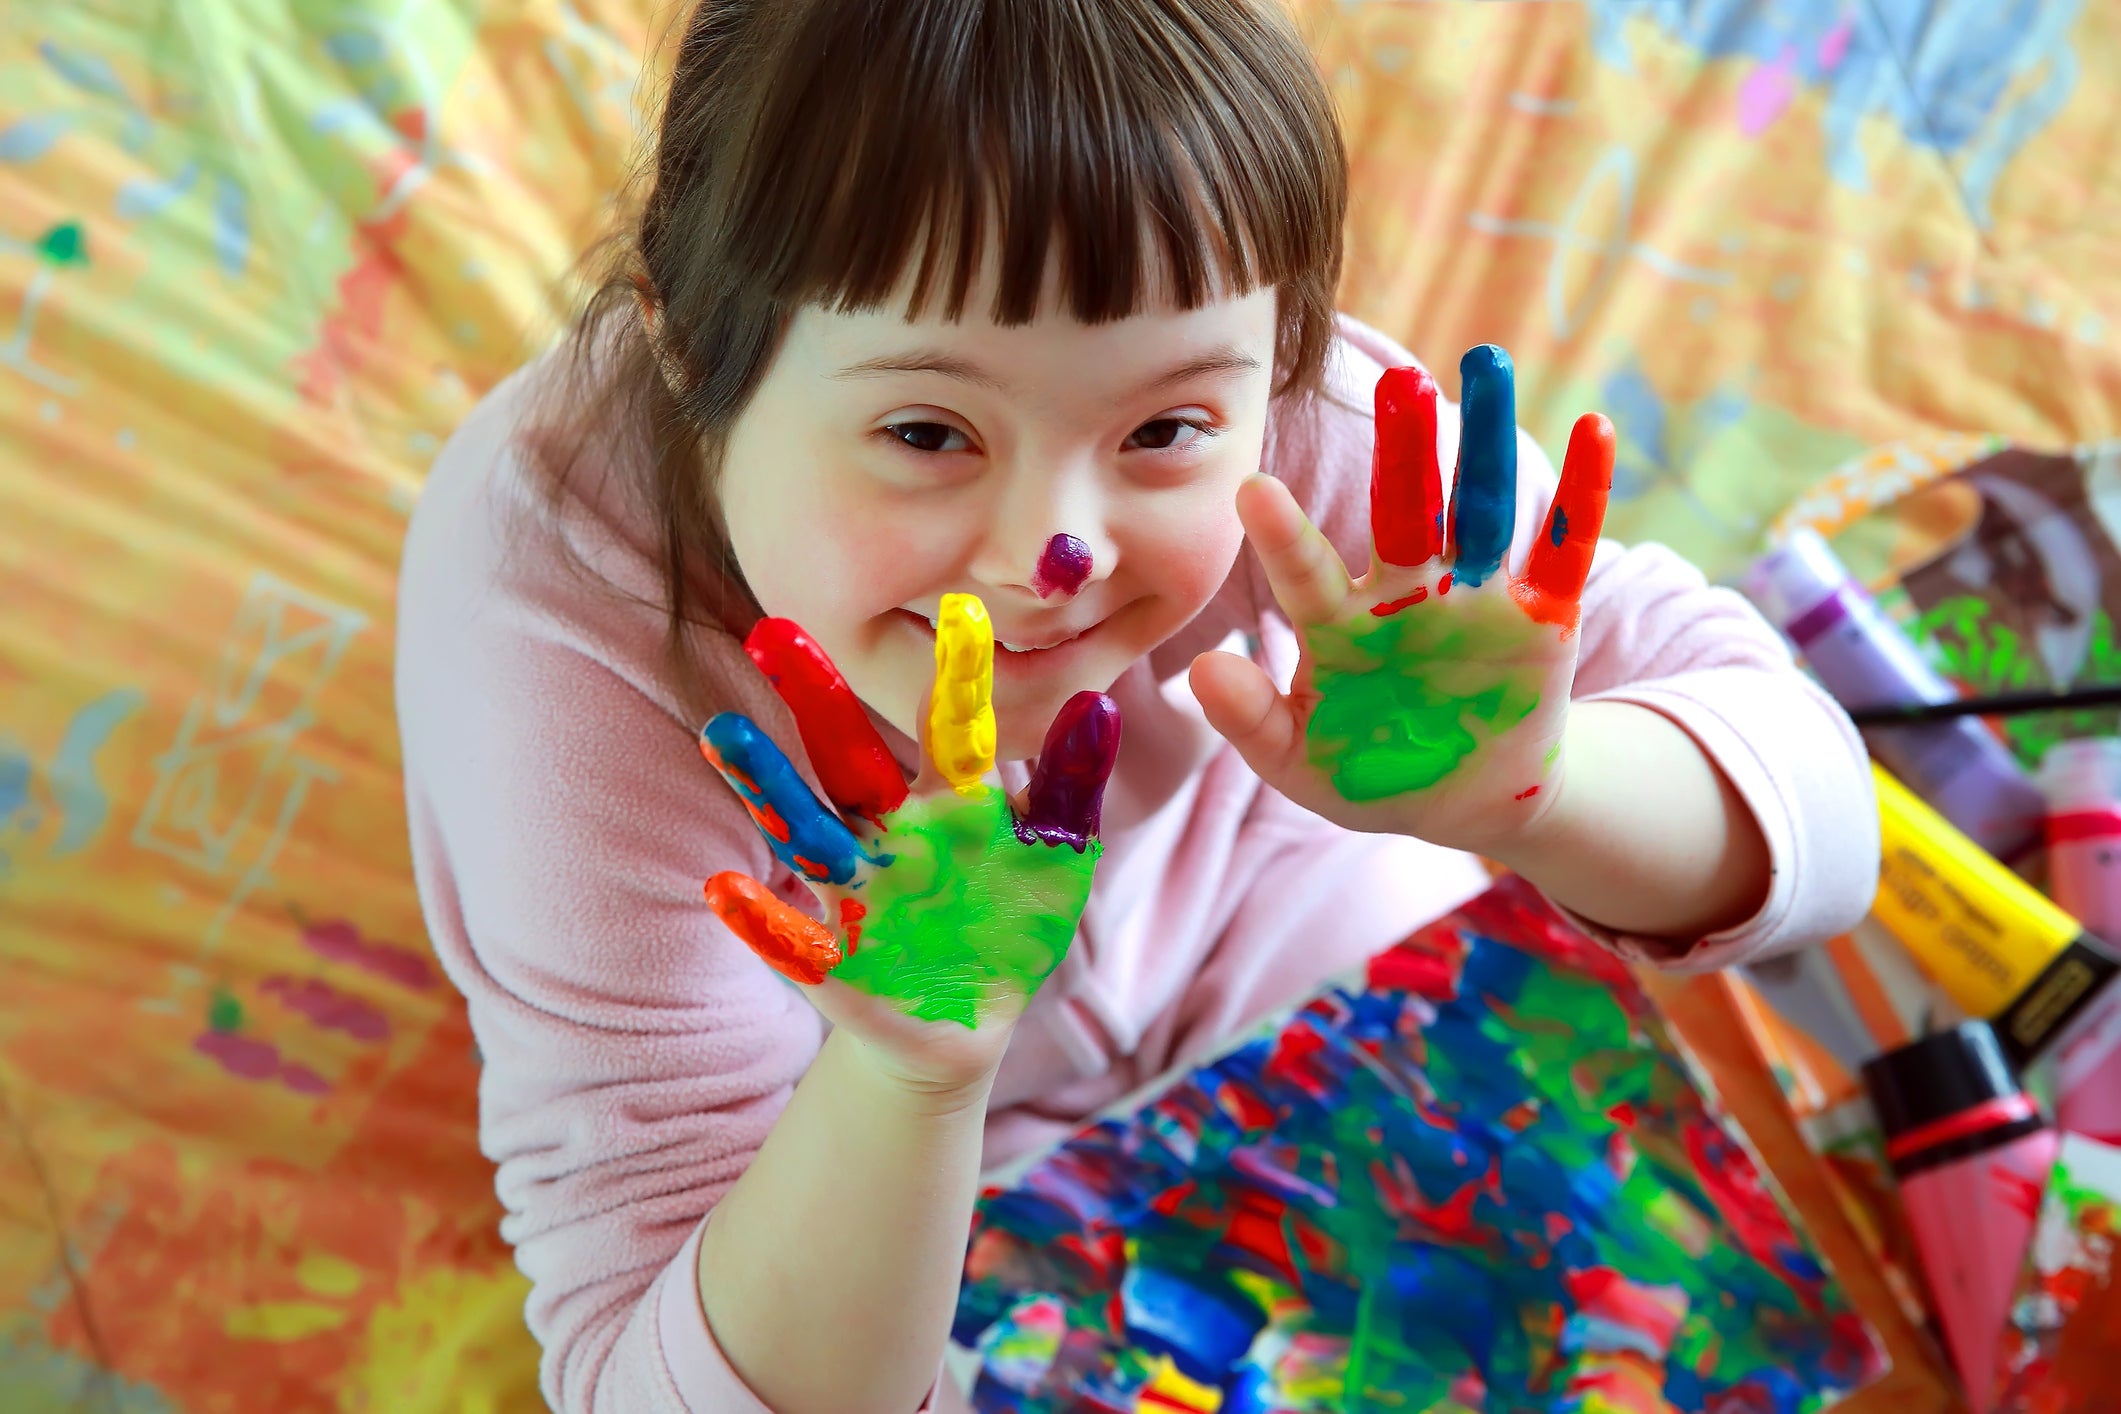 Little girl looking up with dark brown hair in bangs and painted hands with palms up. She is standing on a multicolored sheet.